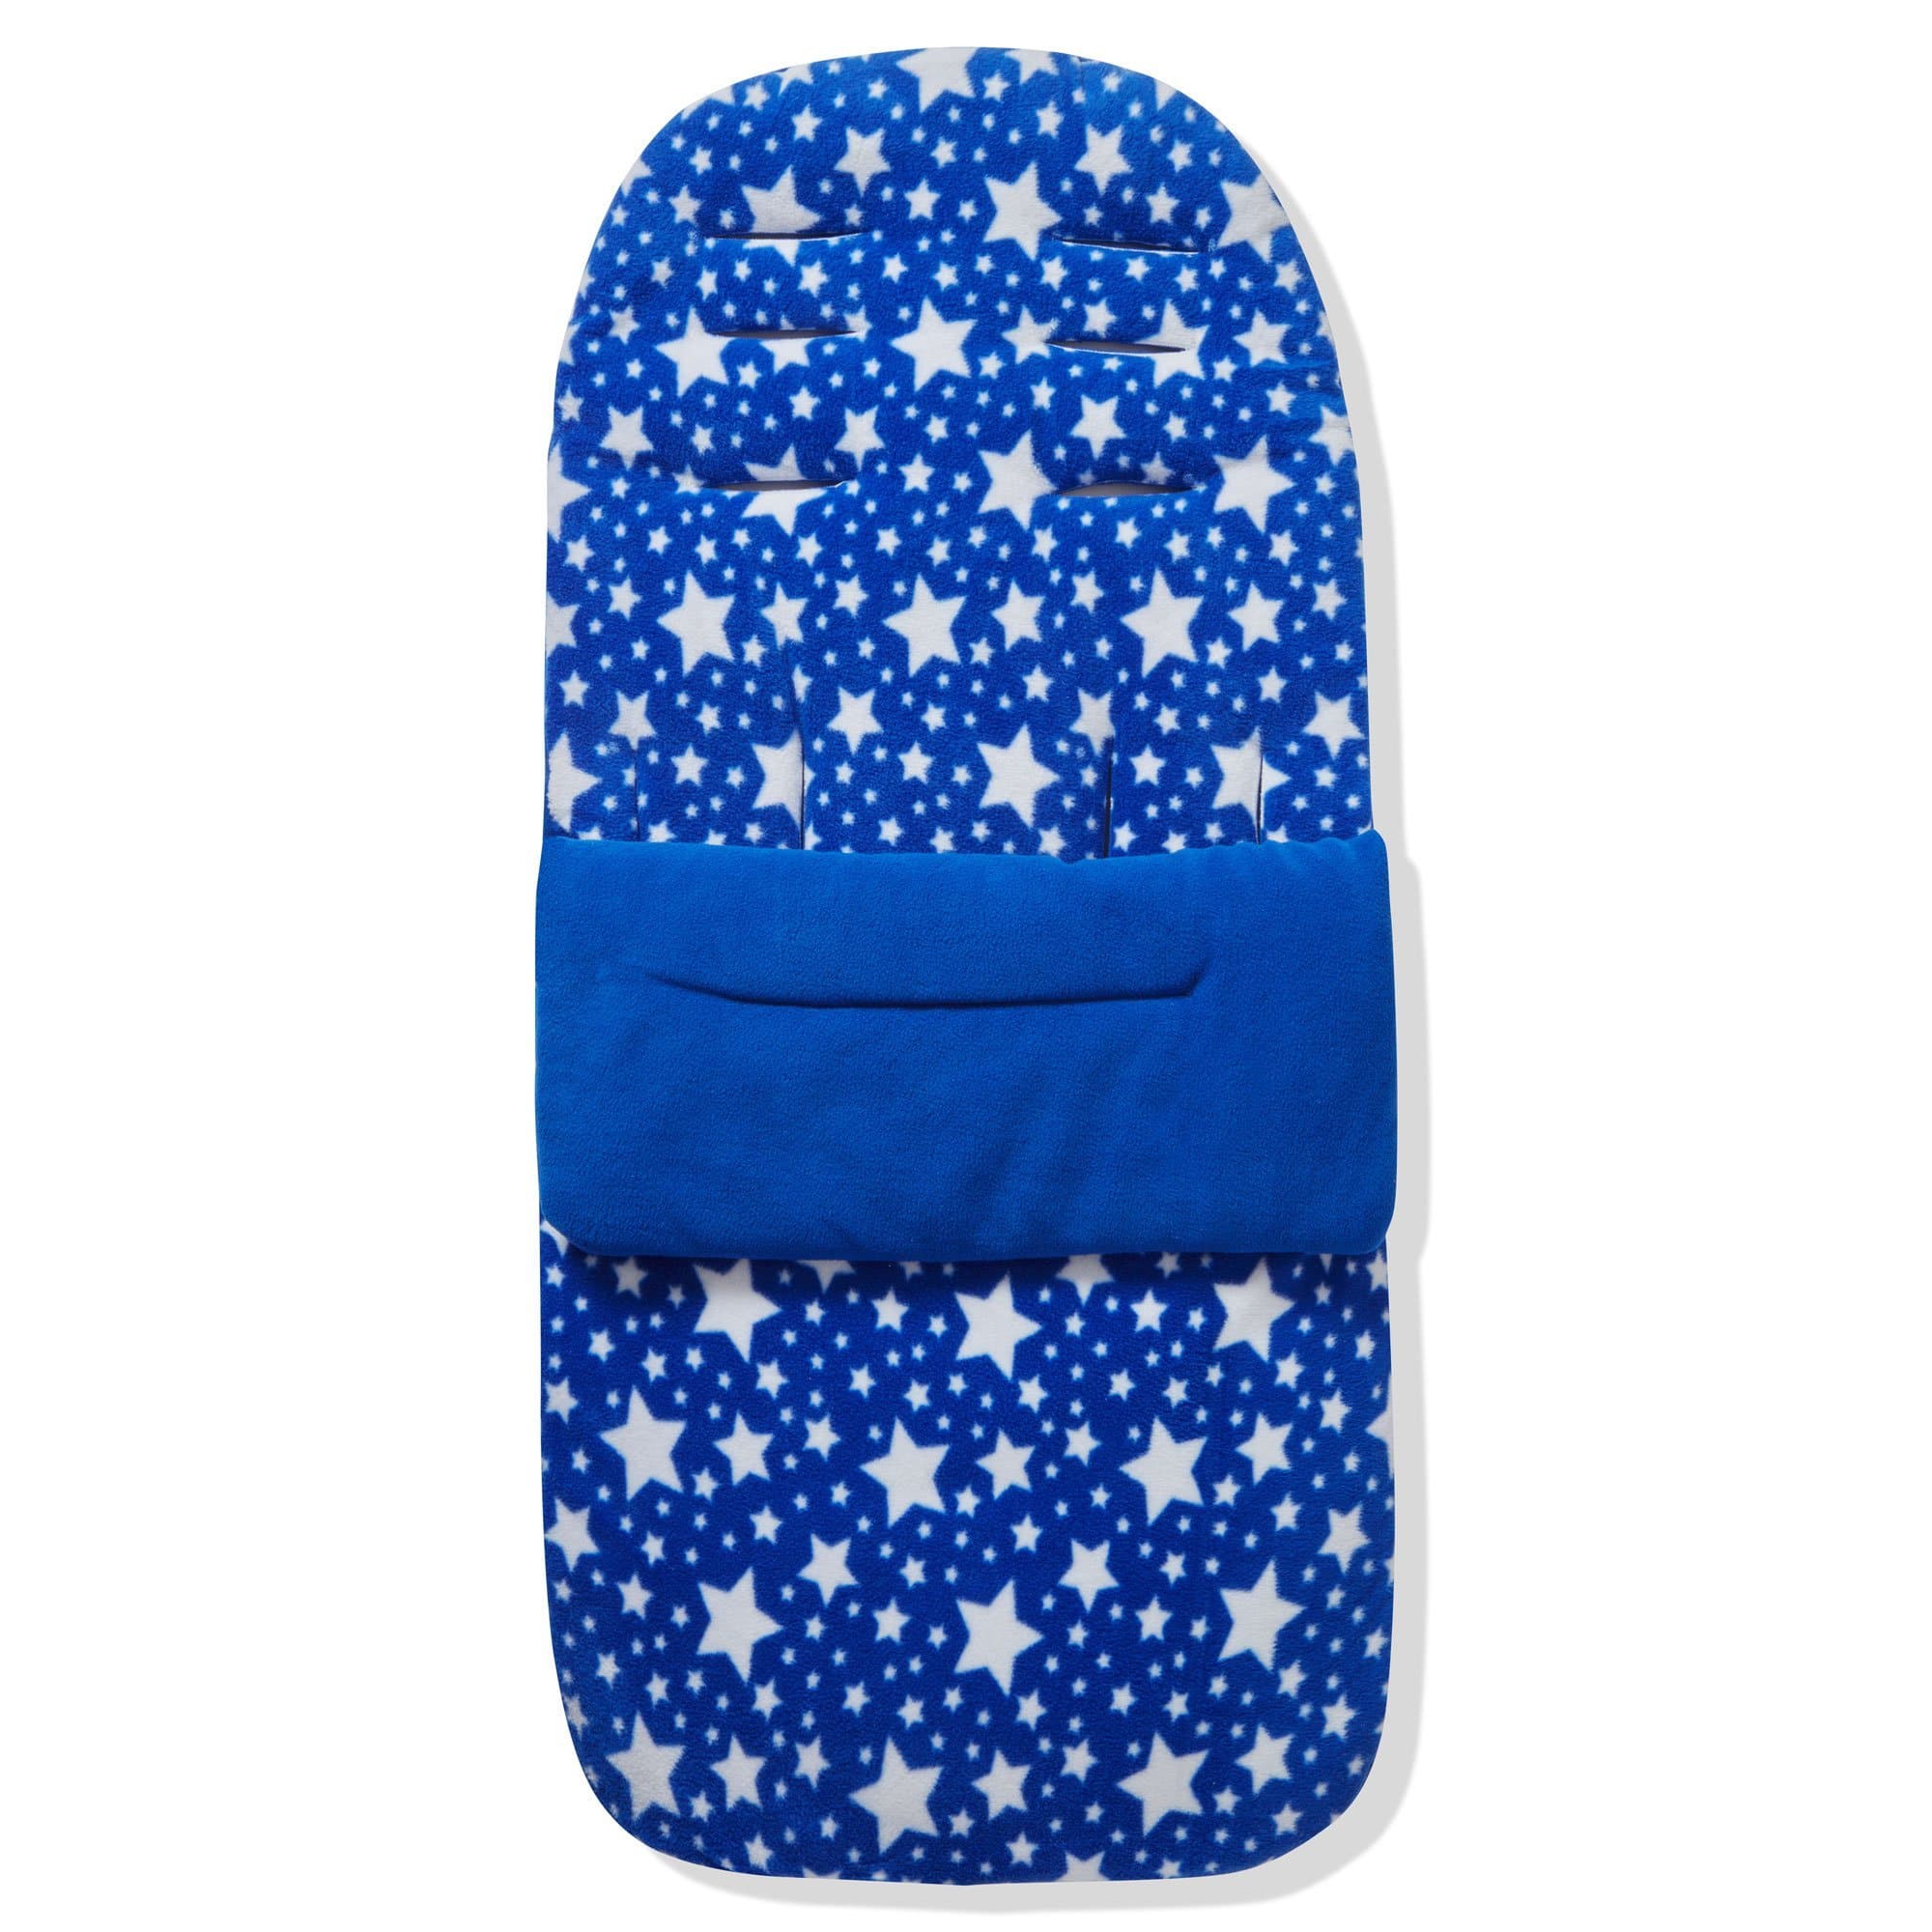 Fleece Footmuff / Cosy Toes Compatible with Nuna - For Your Little One